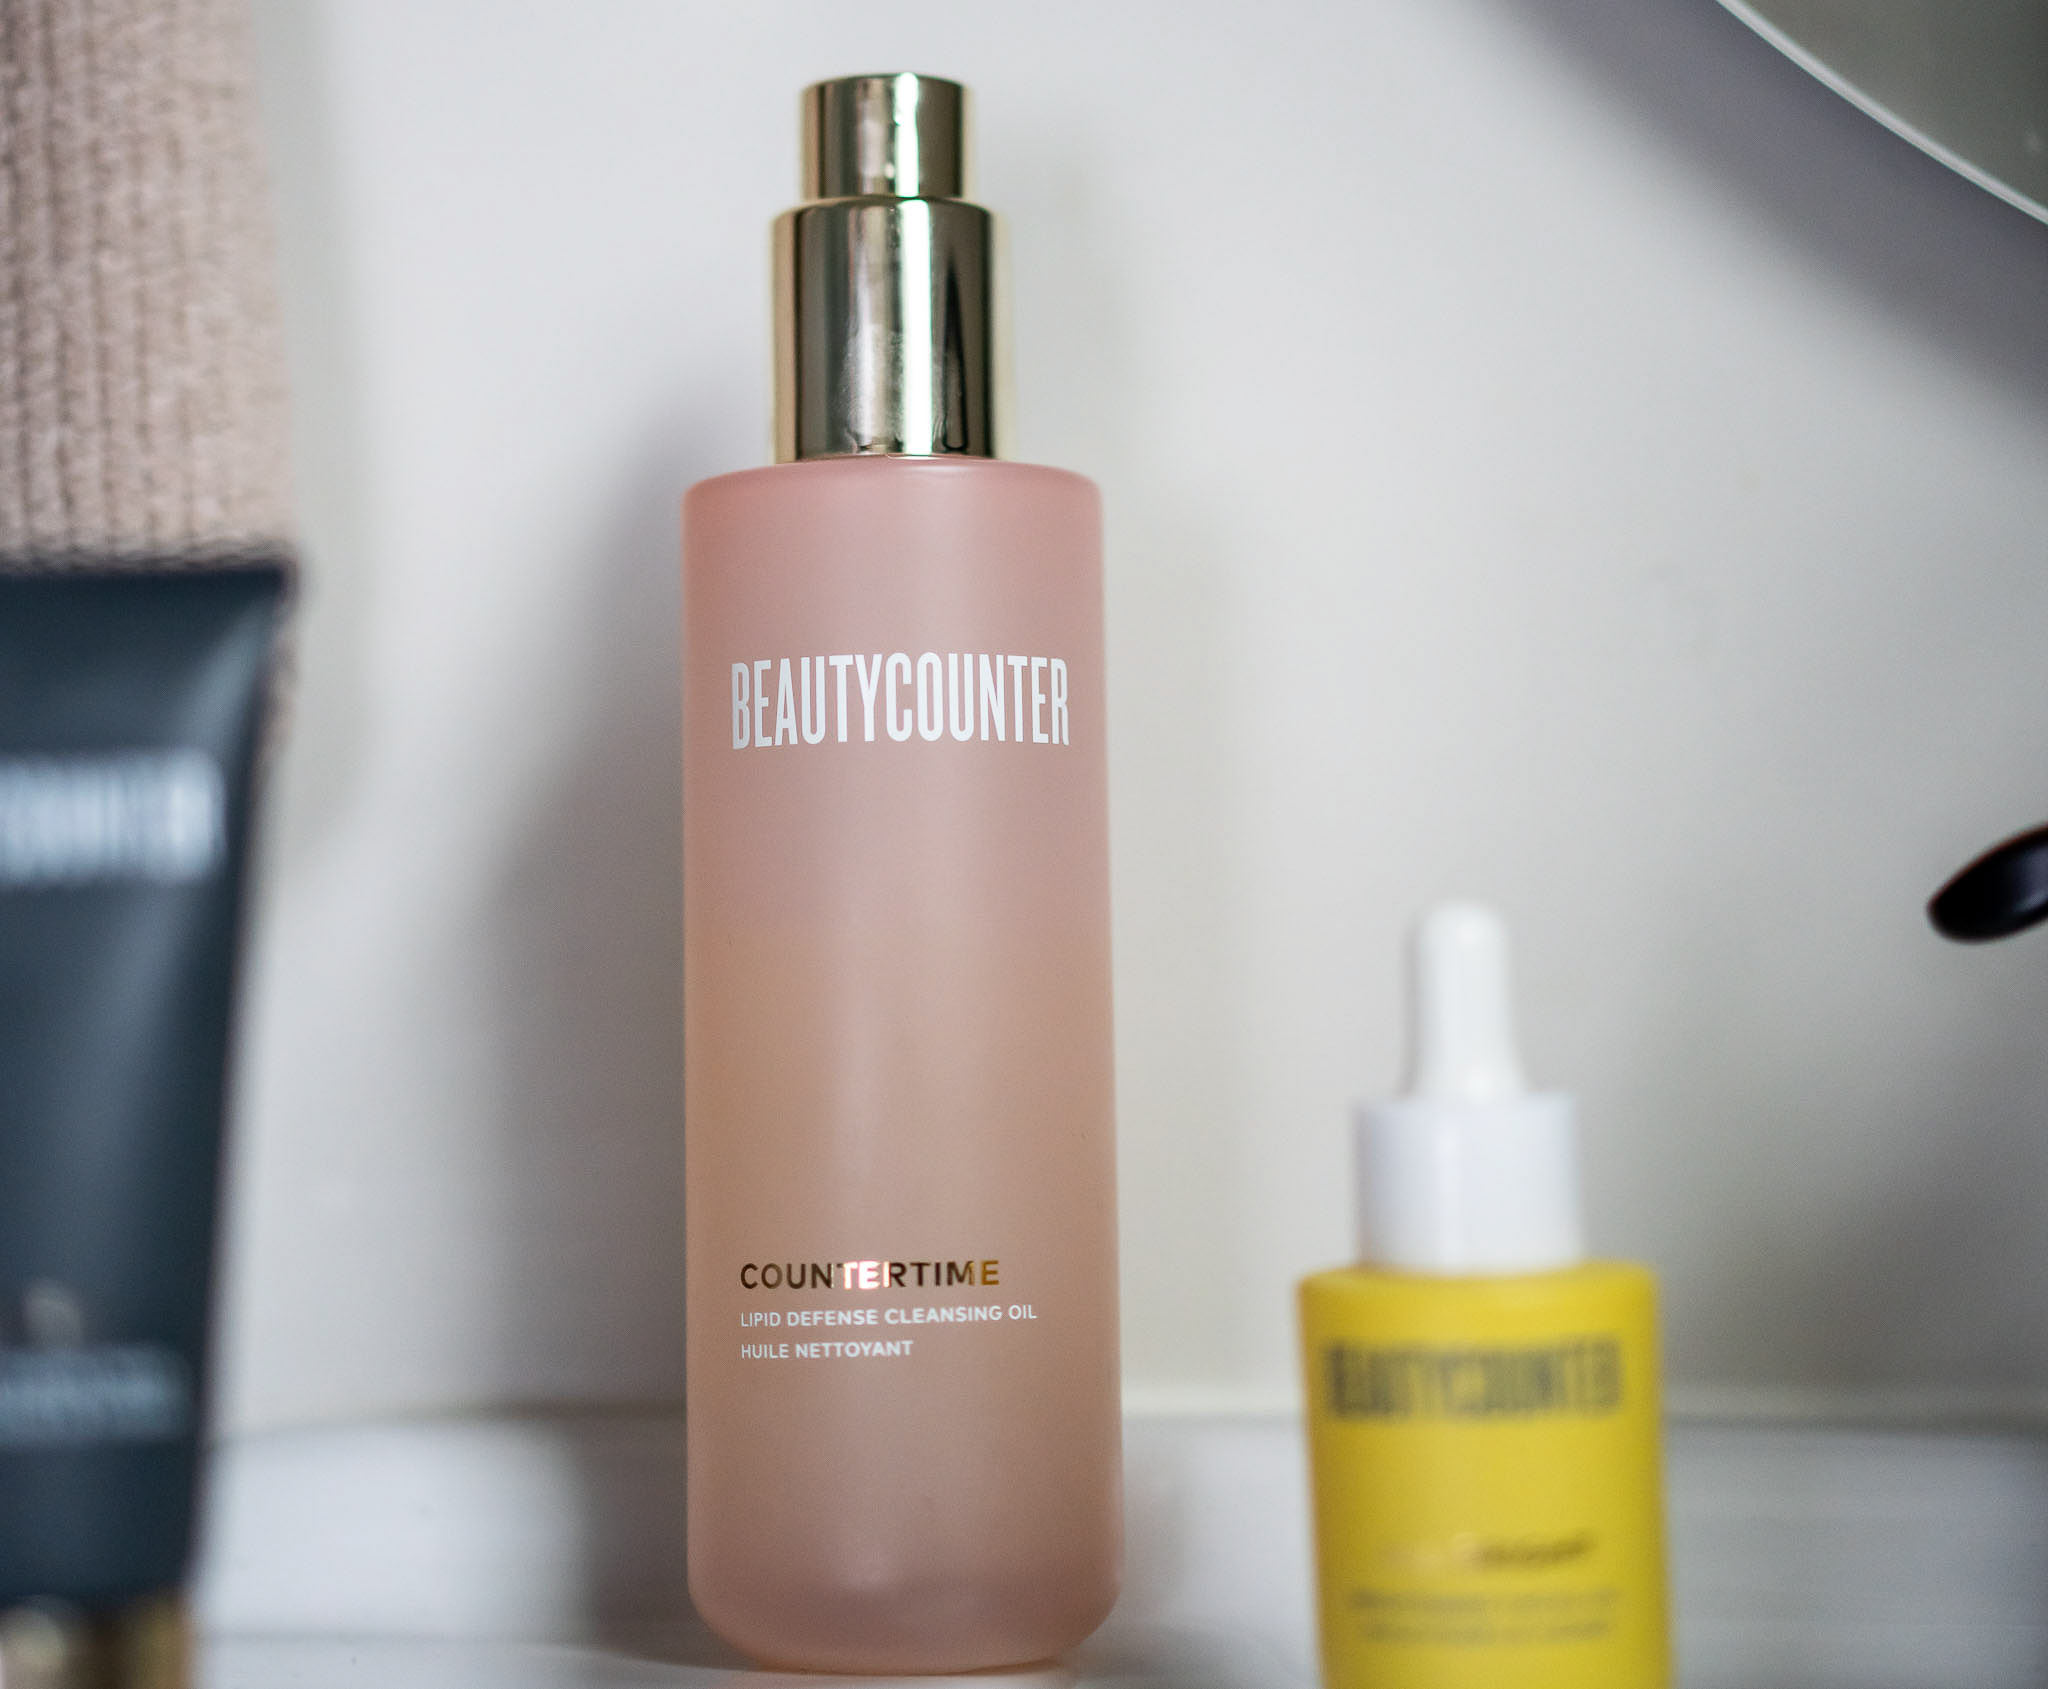 Beautycounter Product Reviews & Recommendations